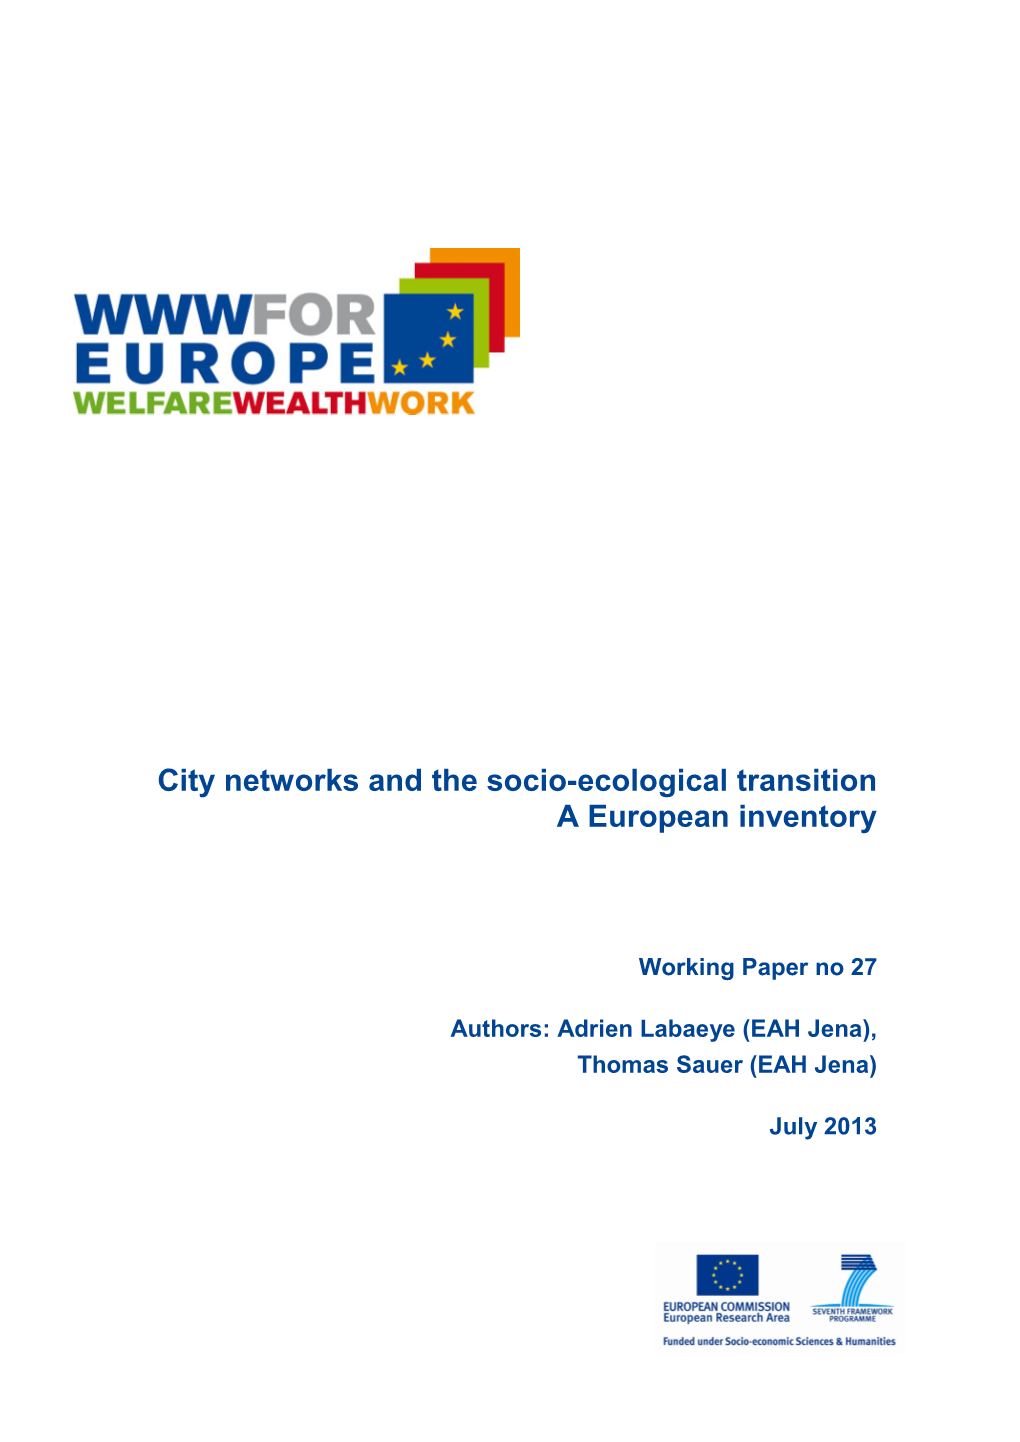 City Networks and the Socio-Ecological Transition a European Inventory